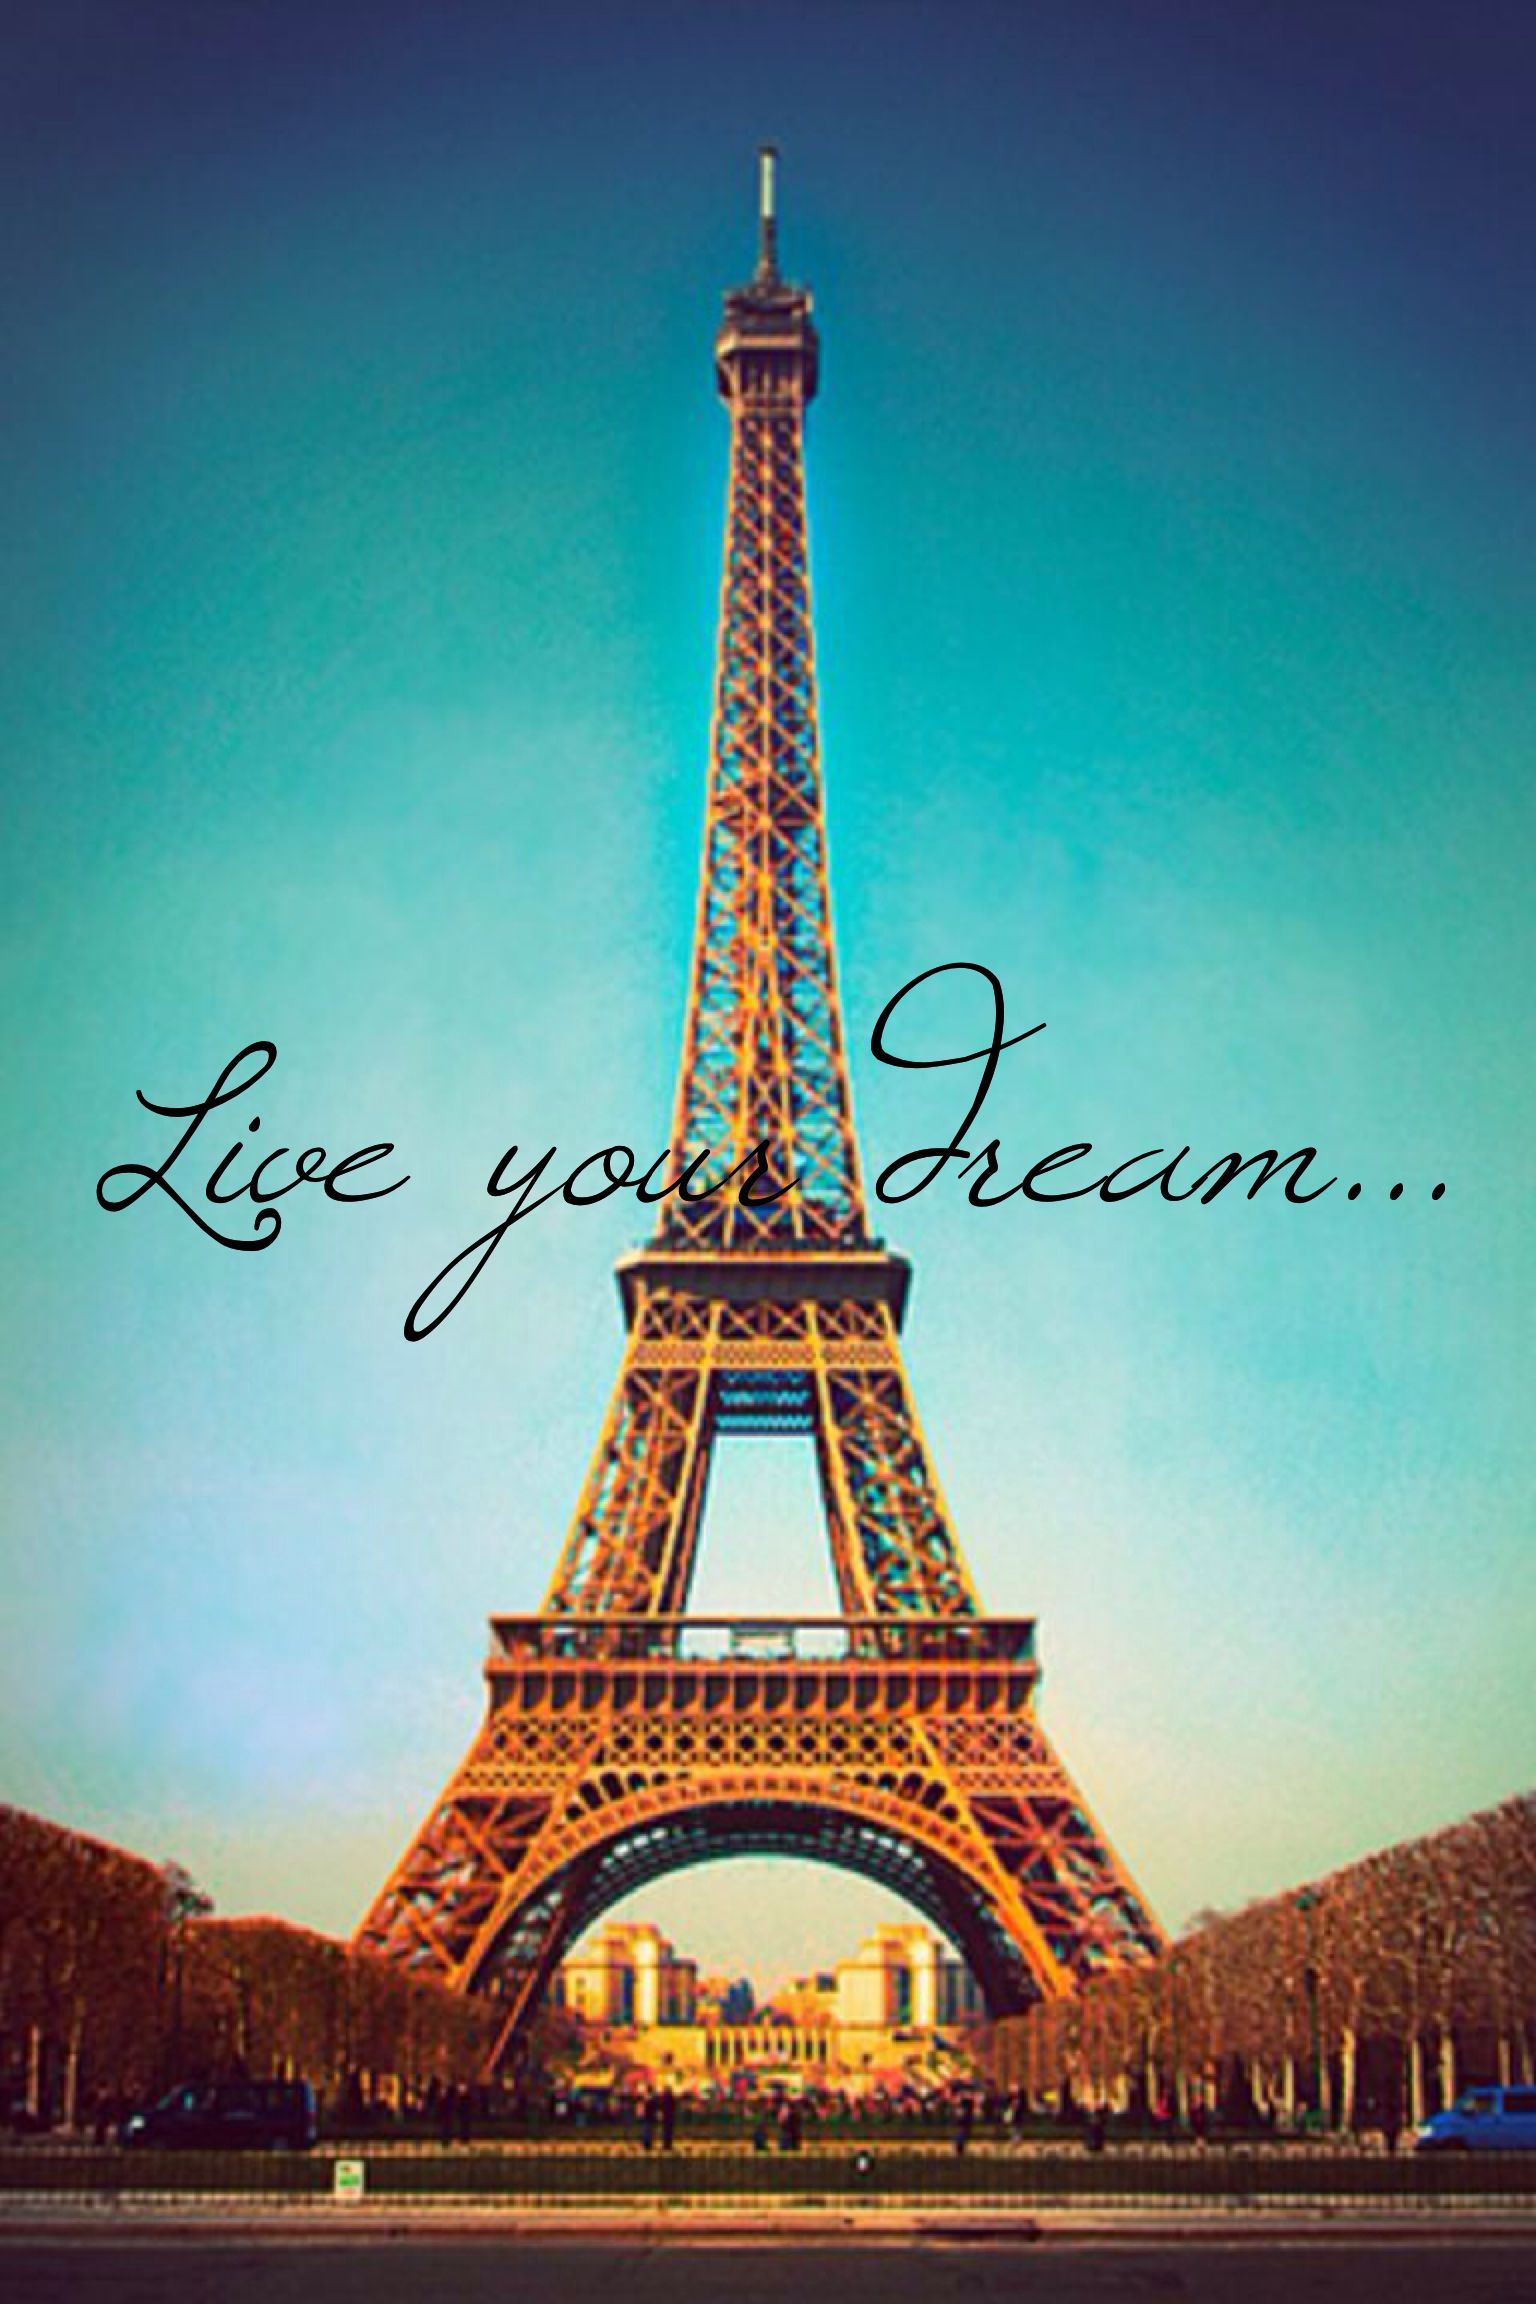 Free download Cute Eiffel Tower pic Live your dream travel france ...